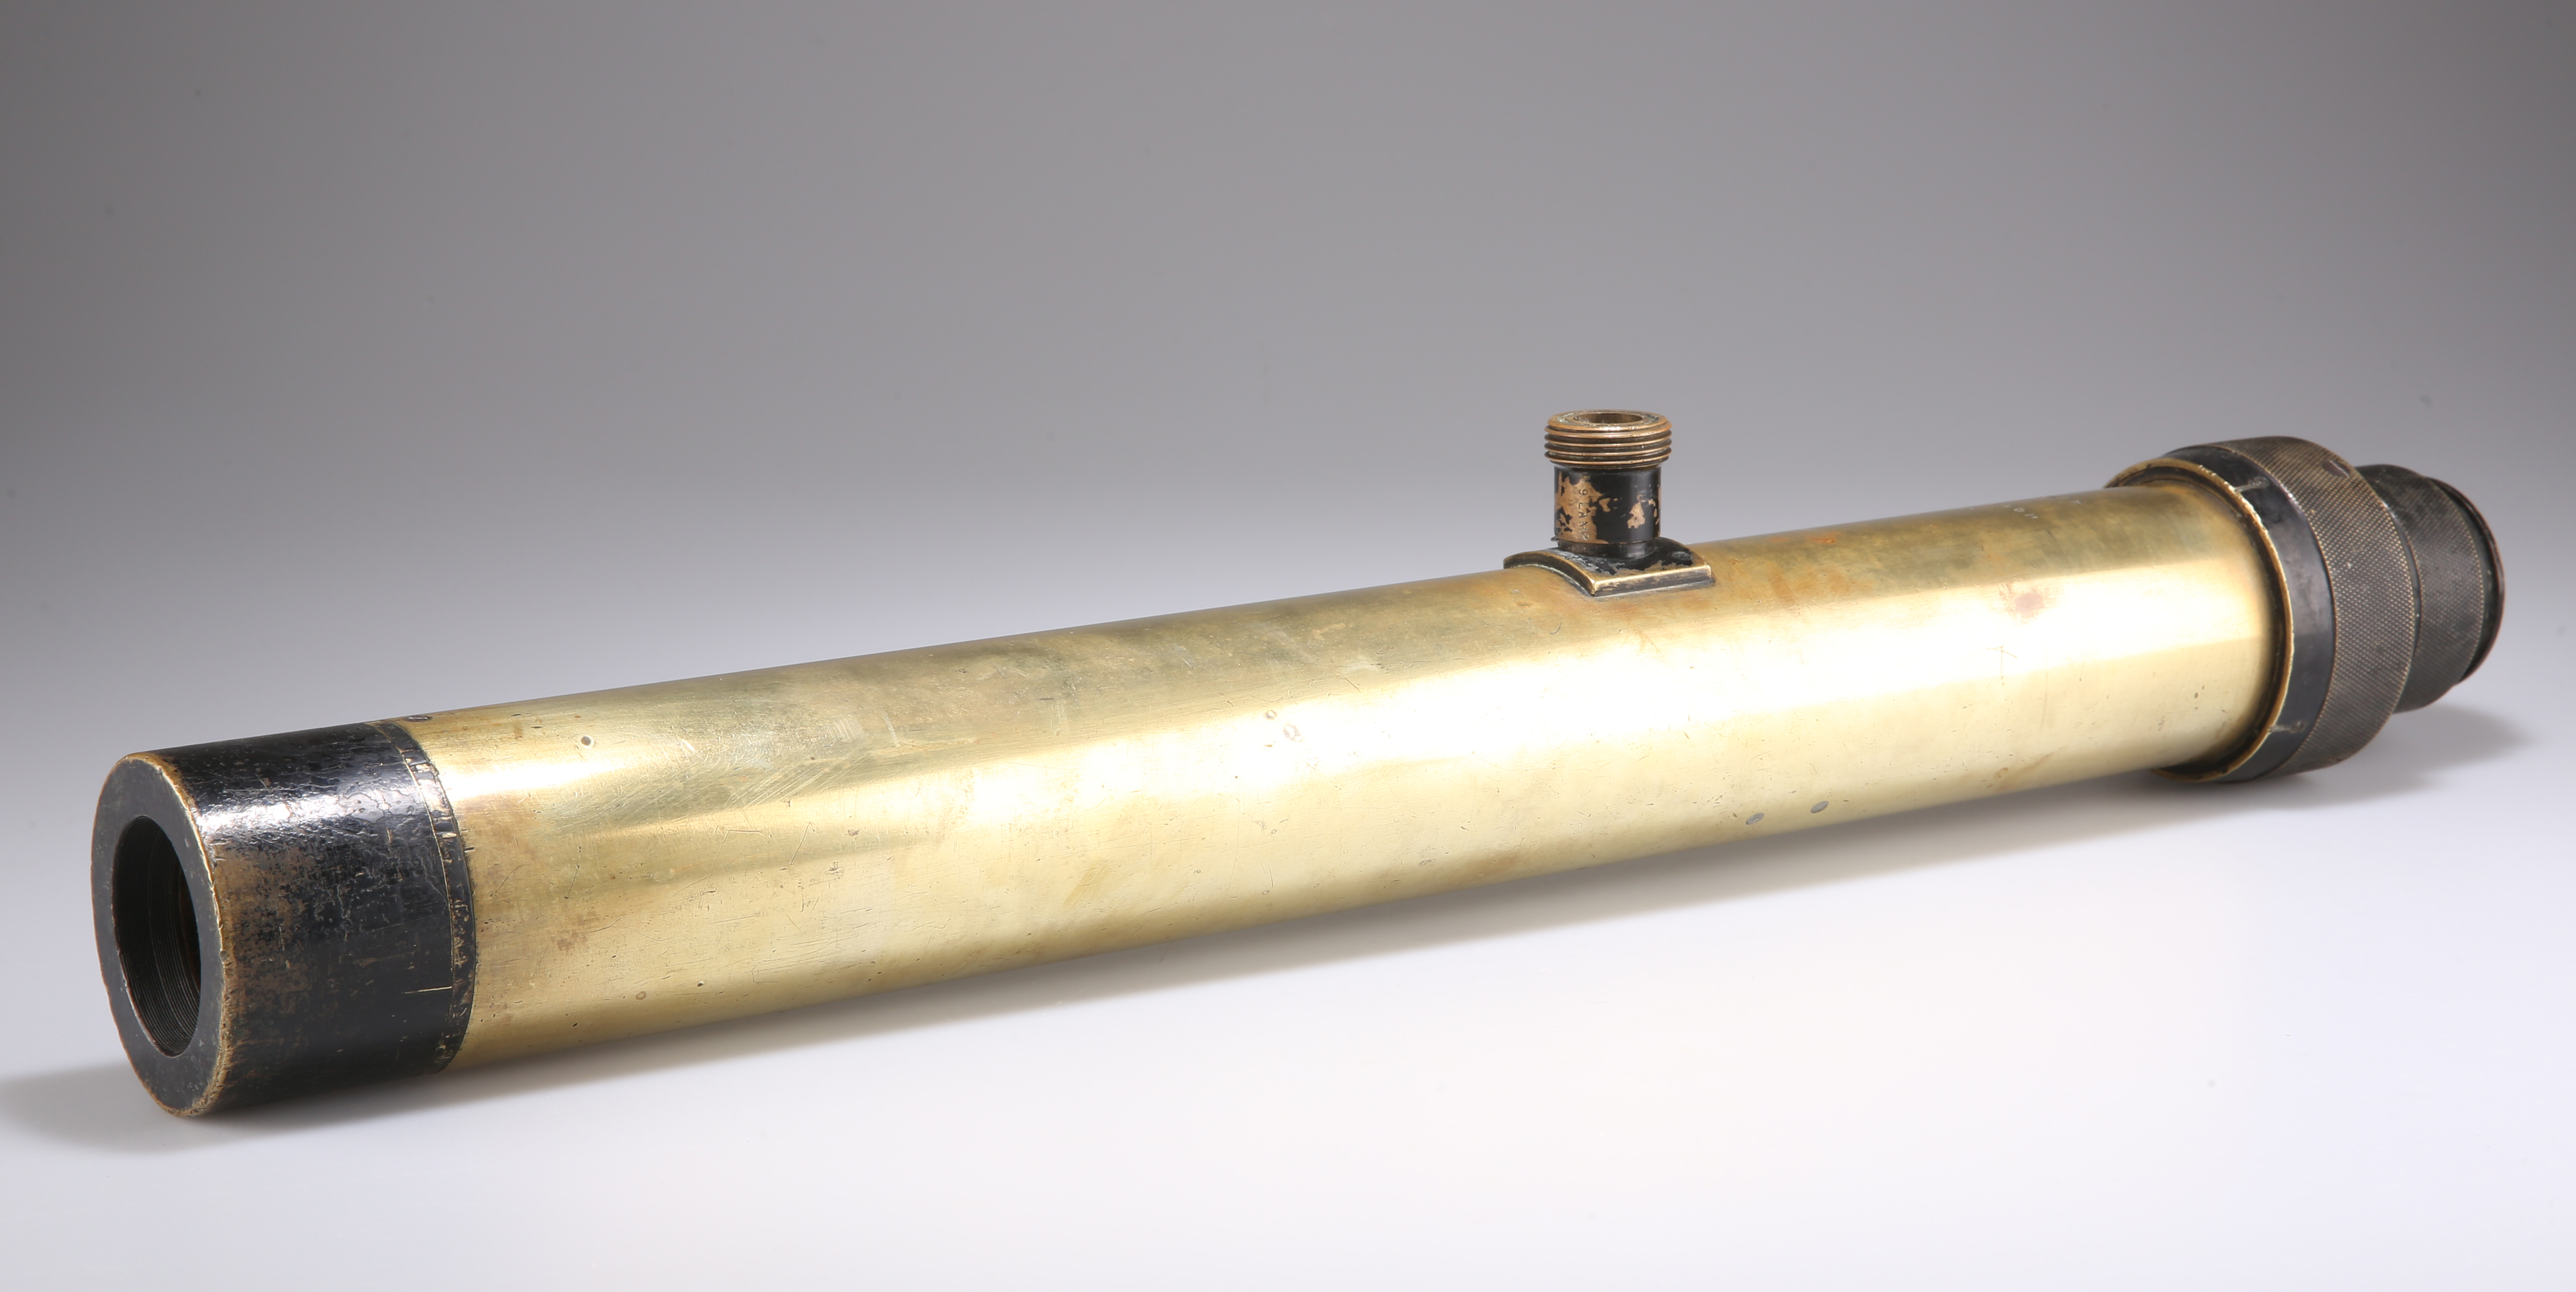 EARLY 20TH CENTURY ROSS, LONDON VARIABLE POWER 3 TO 9 VARIABLE POWER BRASS AND BLACK JAPANNED GUNSIG - Image 2 of 4